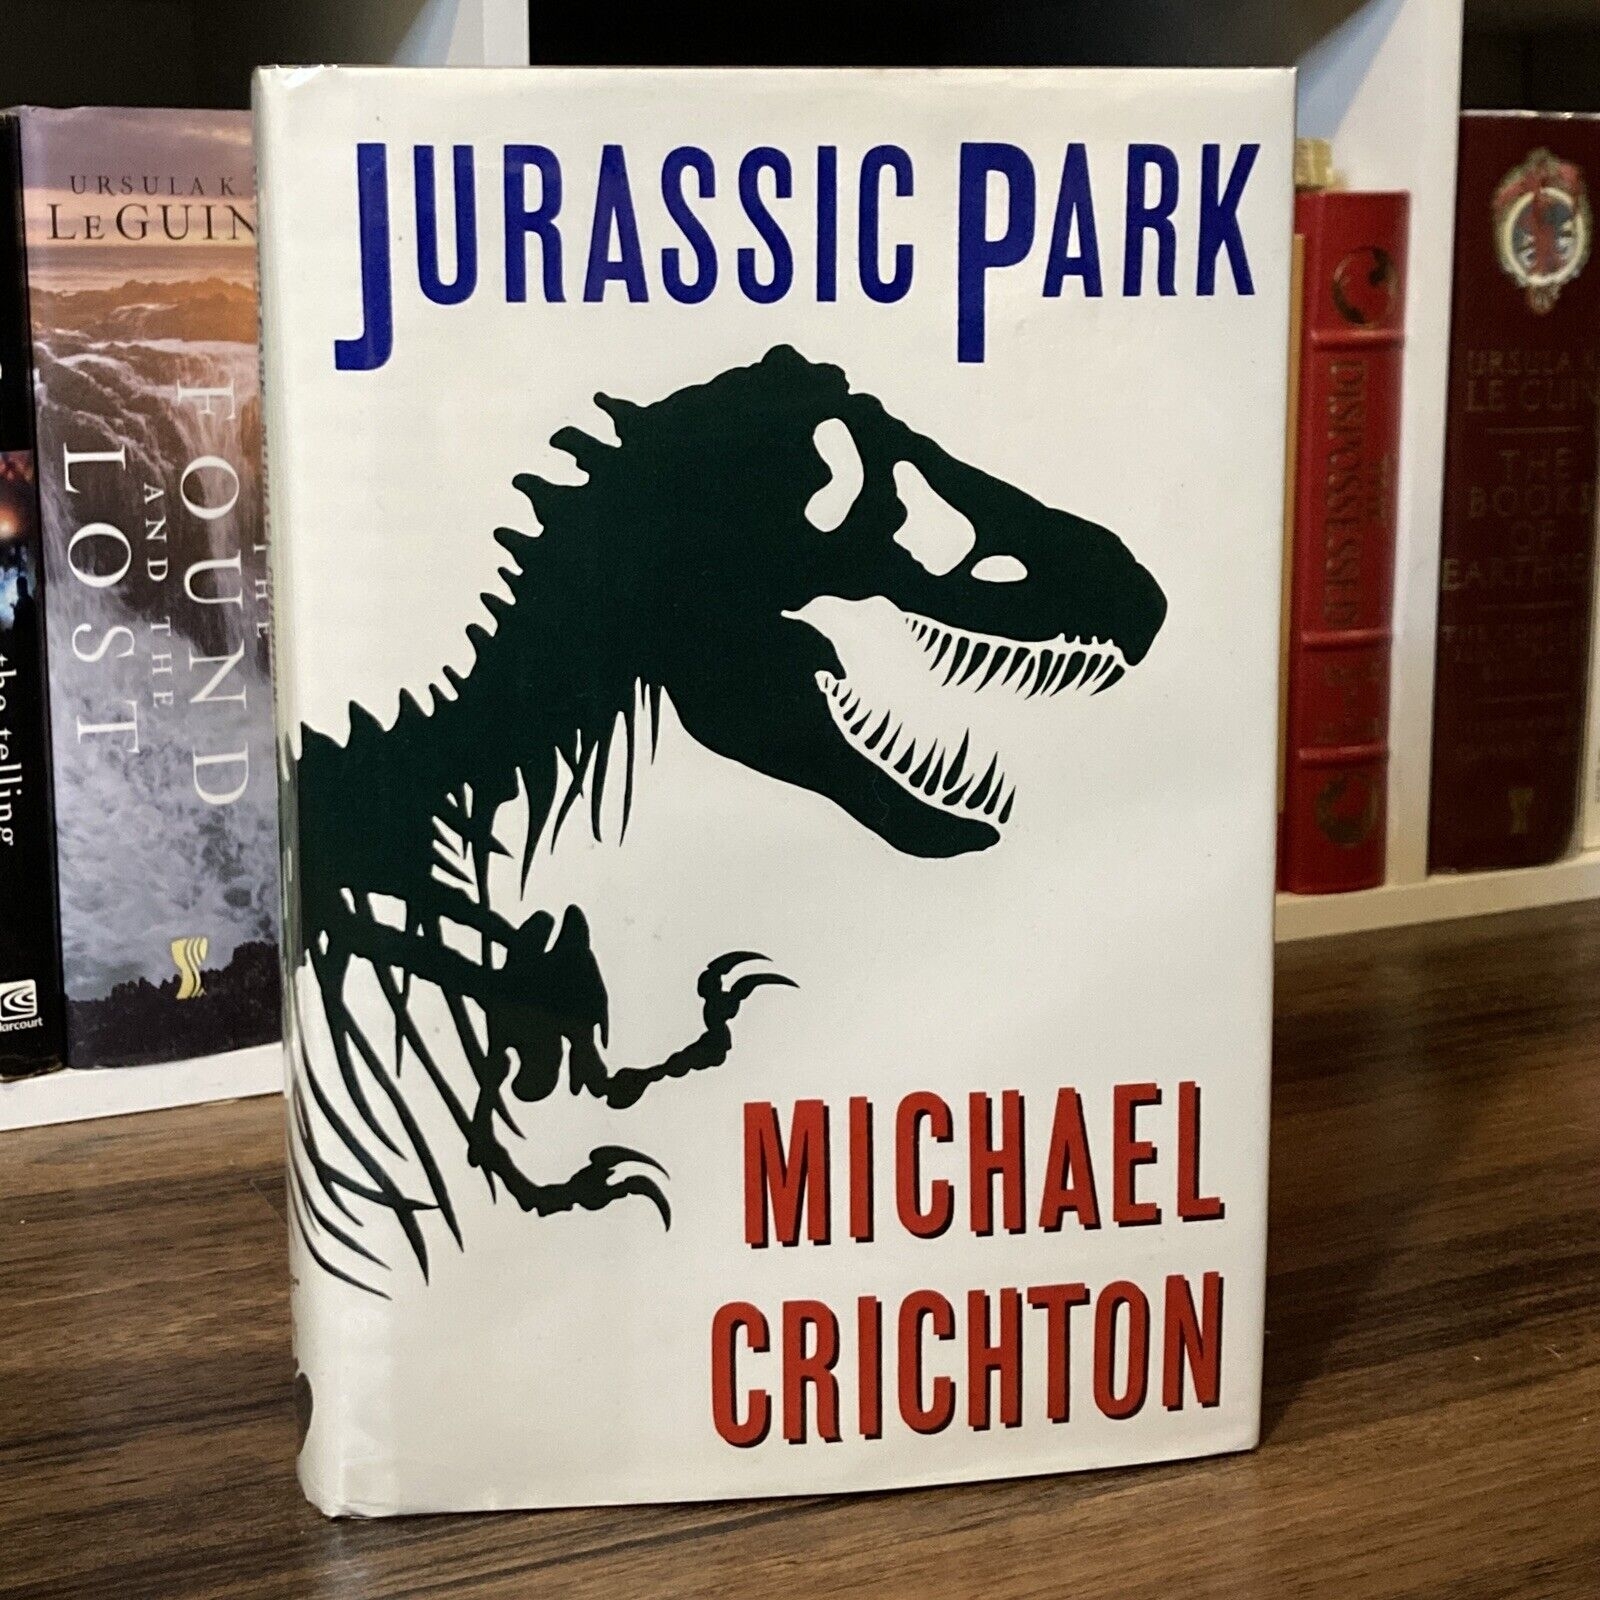 The &quot;Jurassic Park&quot; book cover